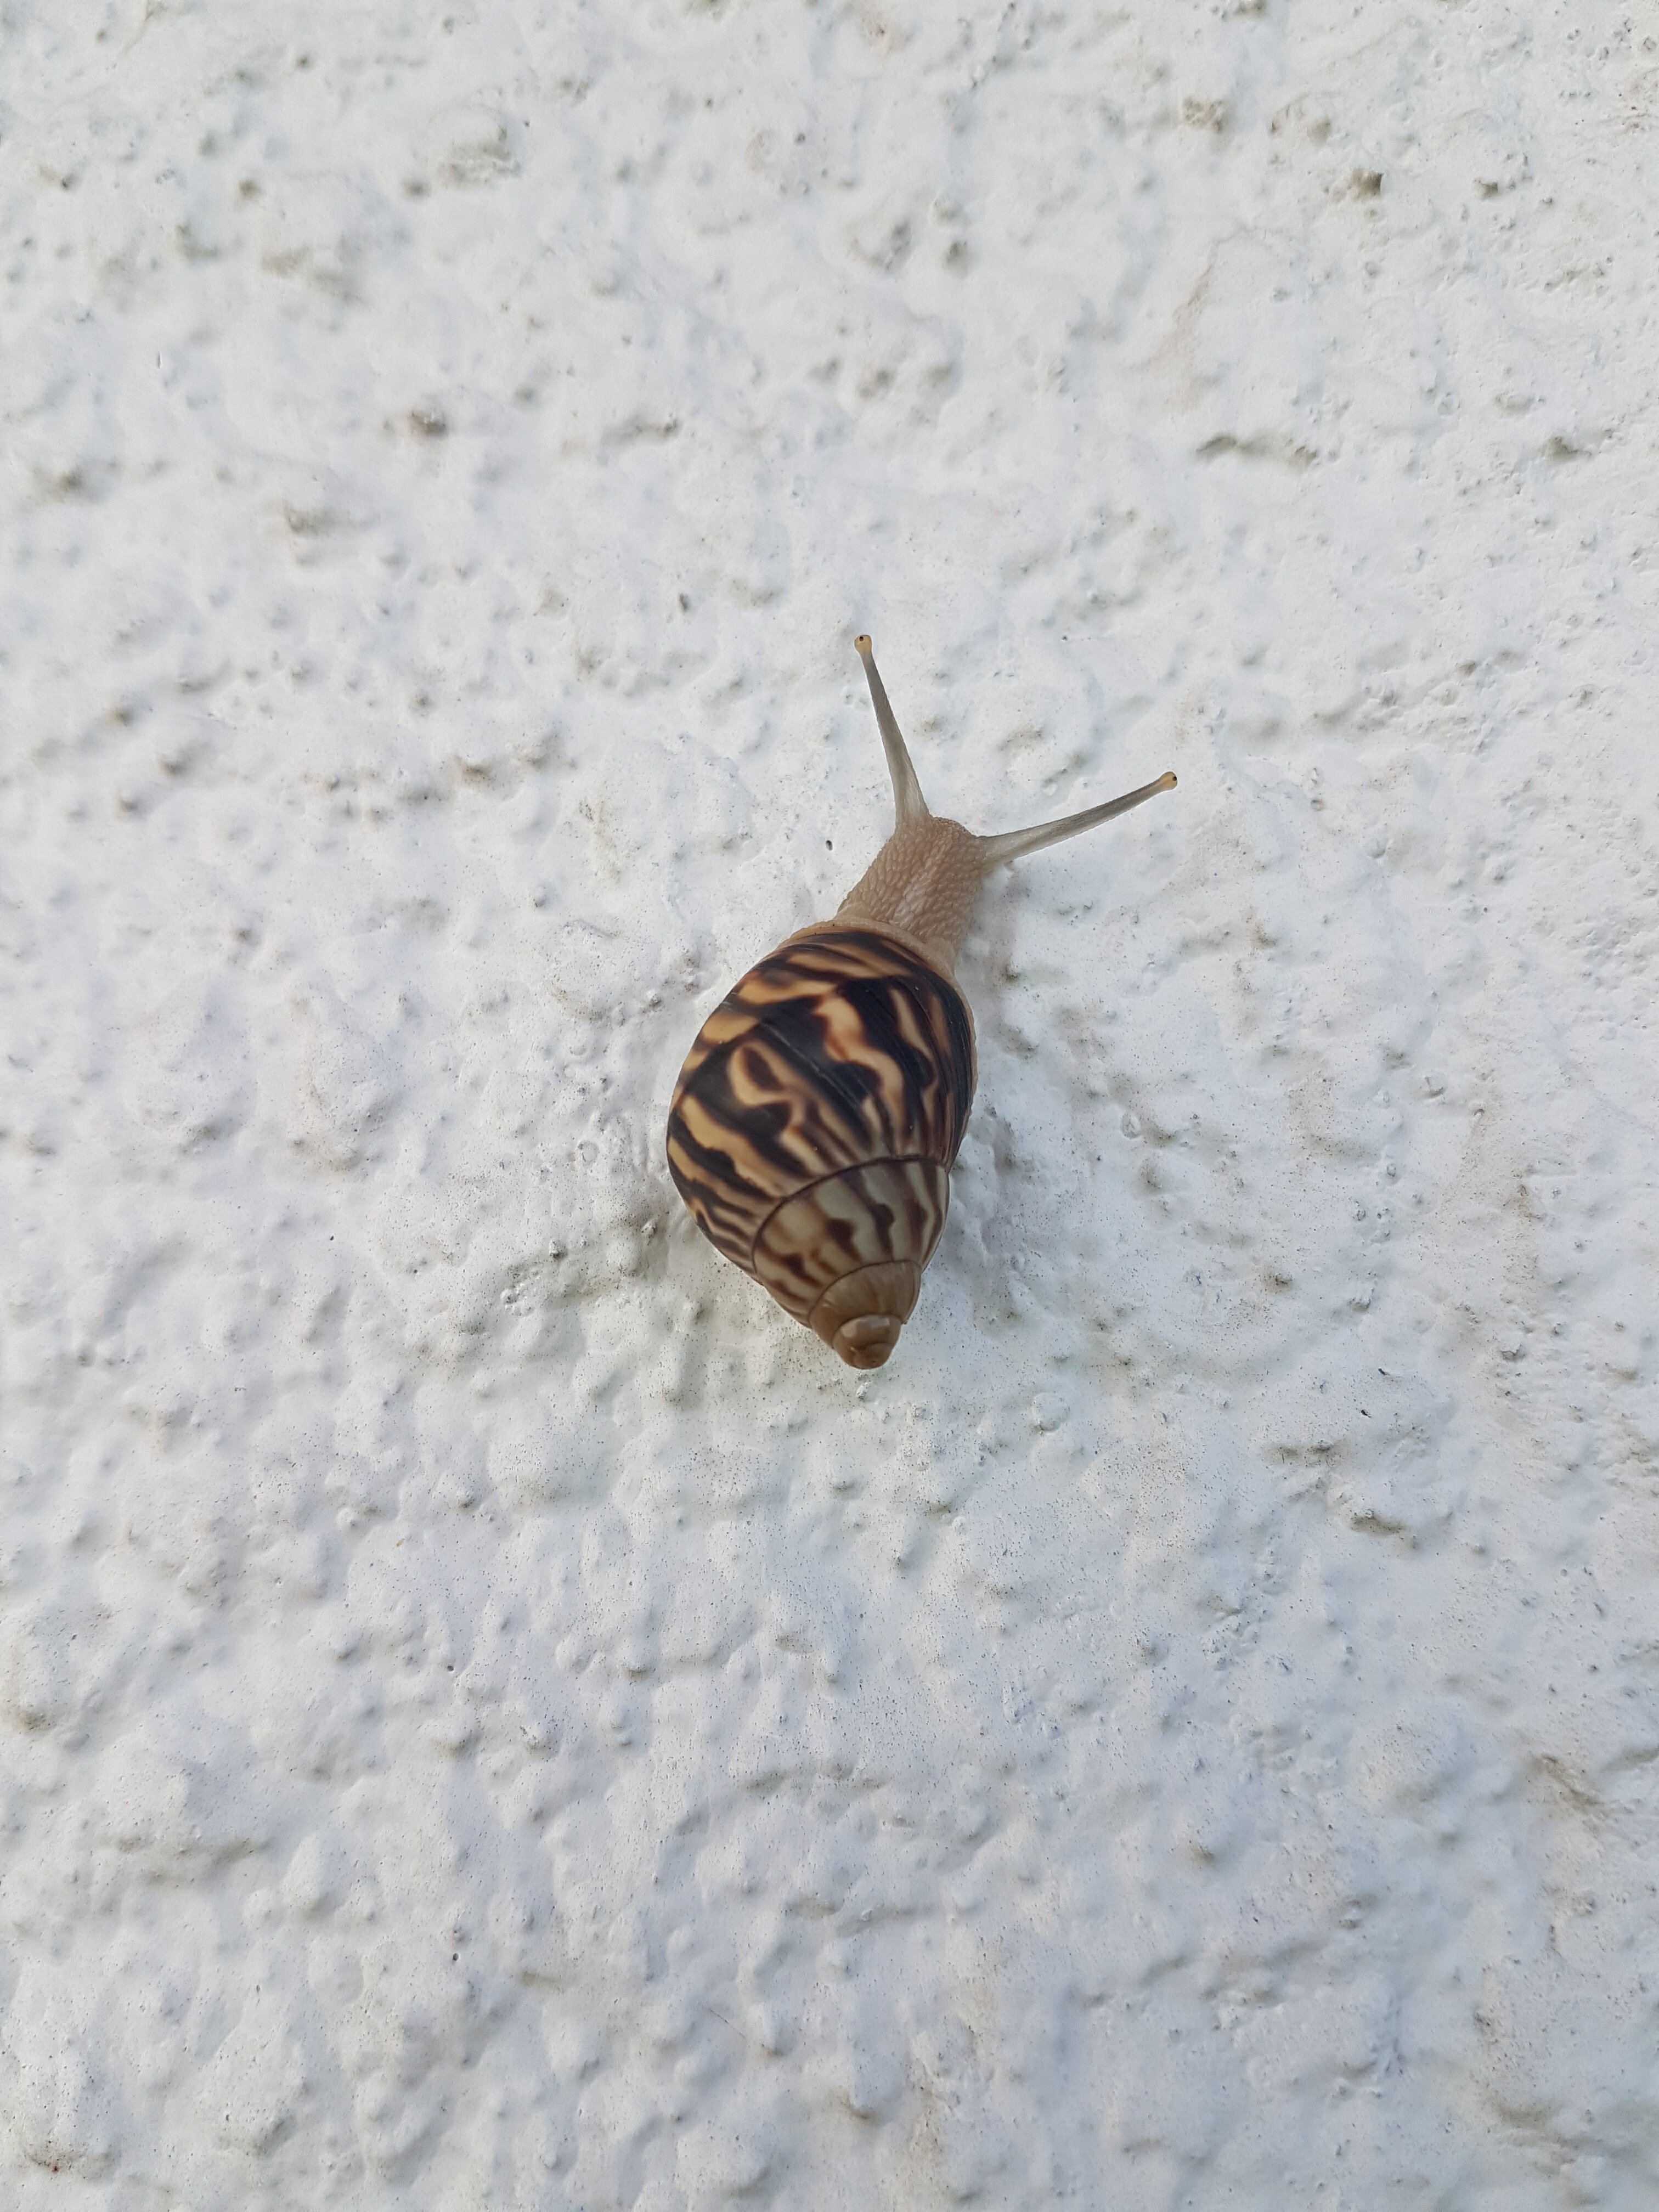 A snail at work